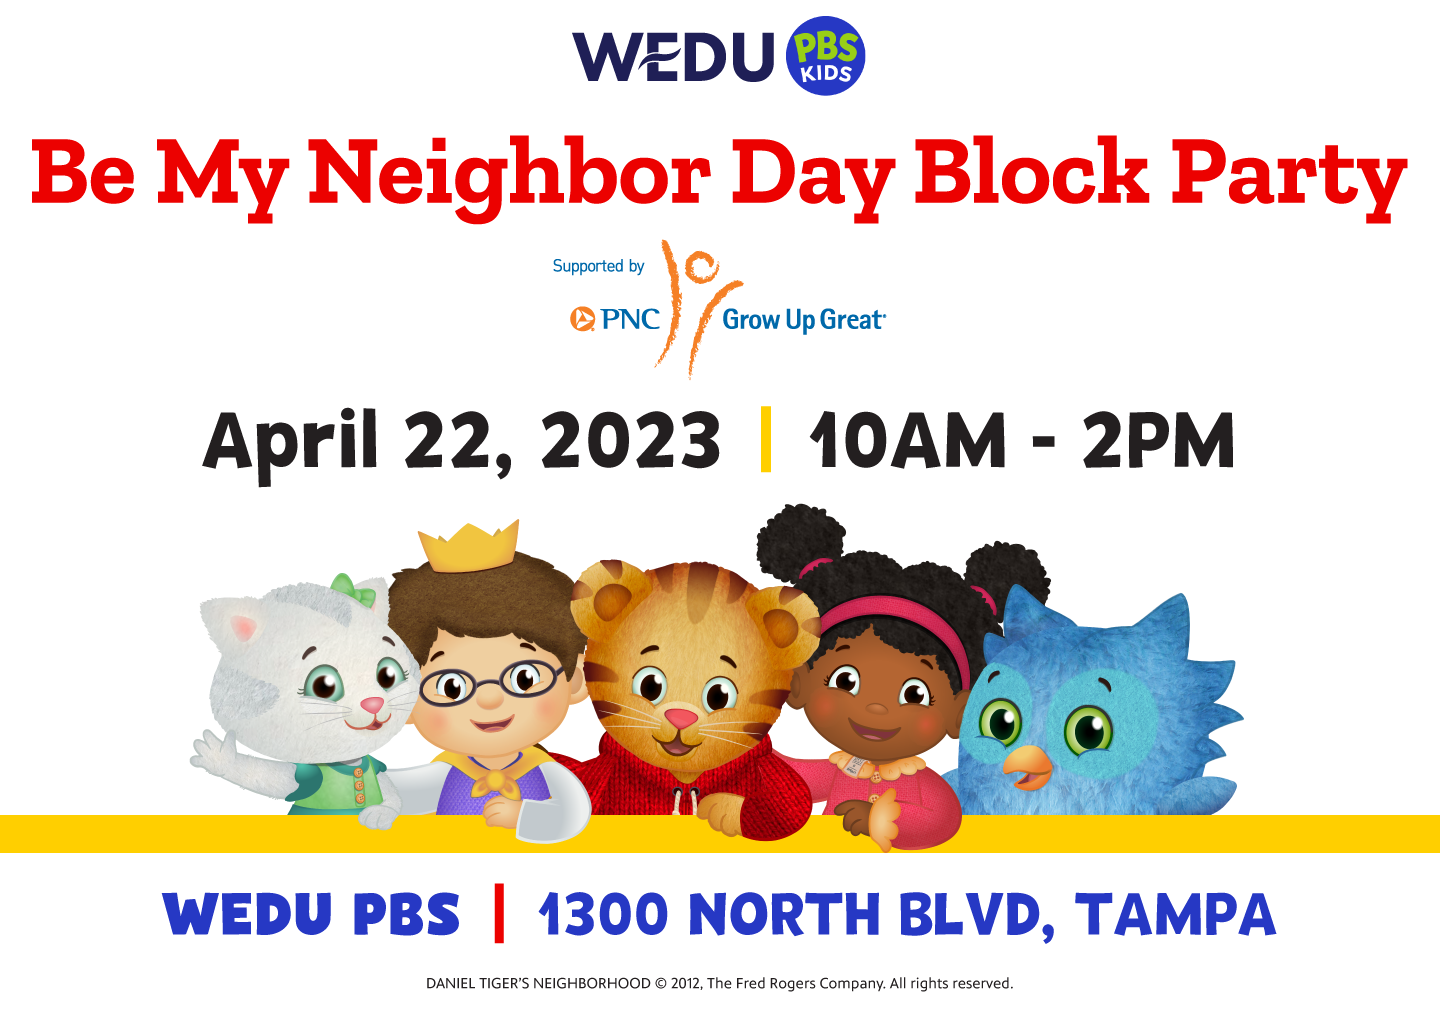 Be My Neighbor Day | April 23, 2022 with Daniel Tiger Characters